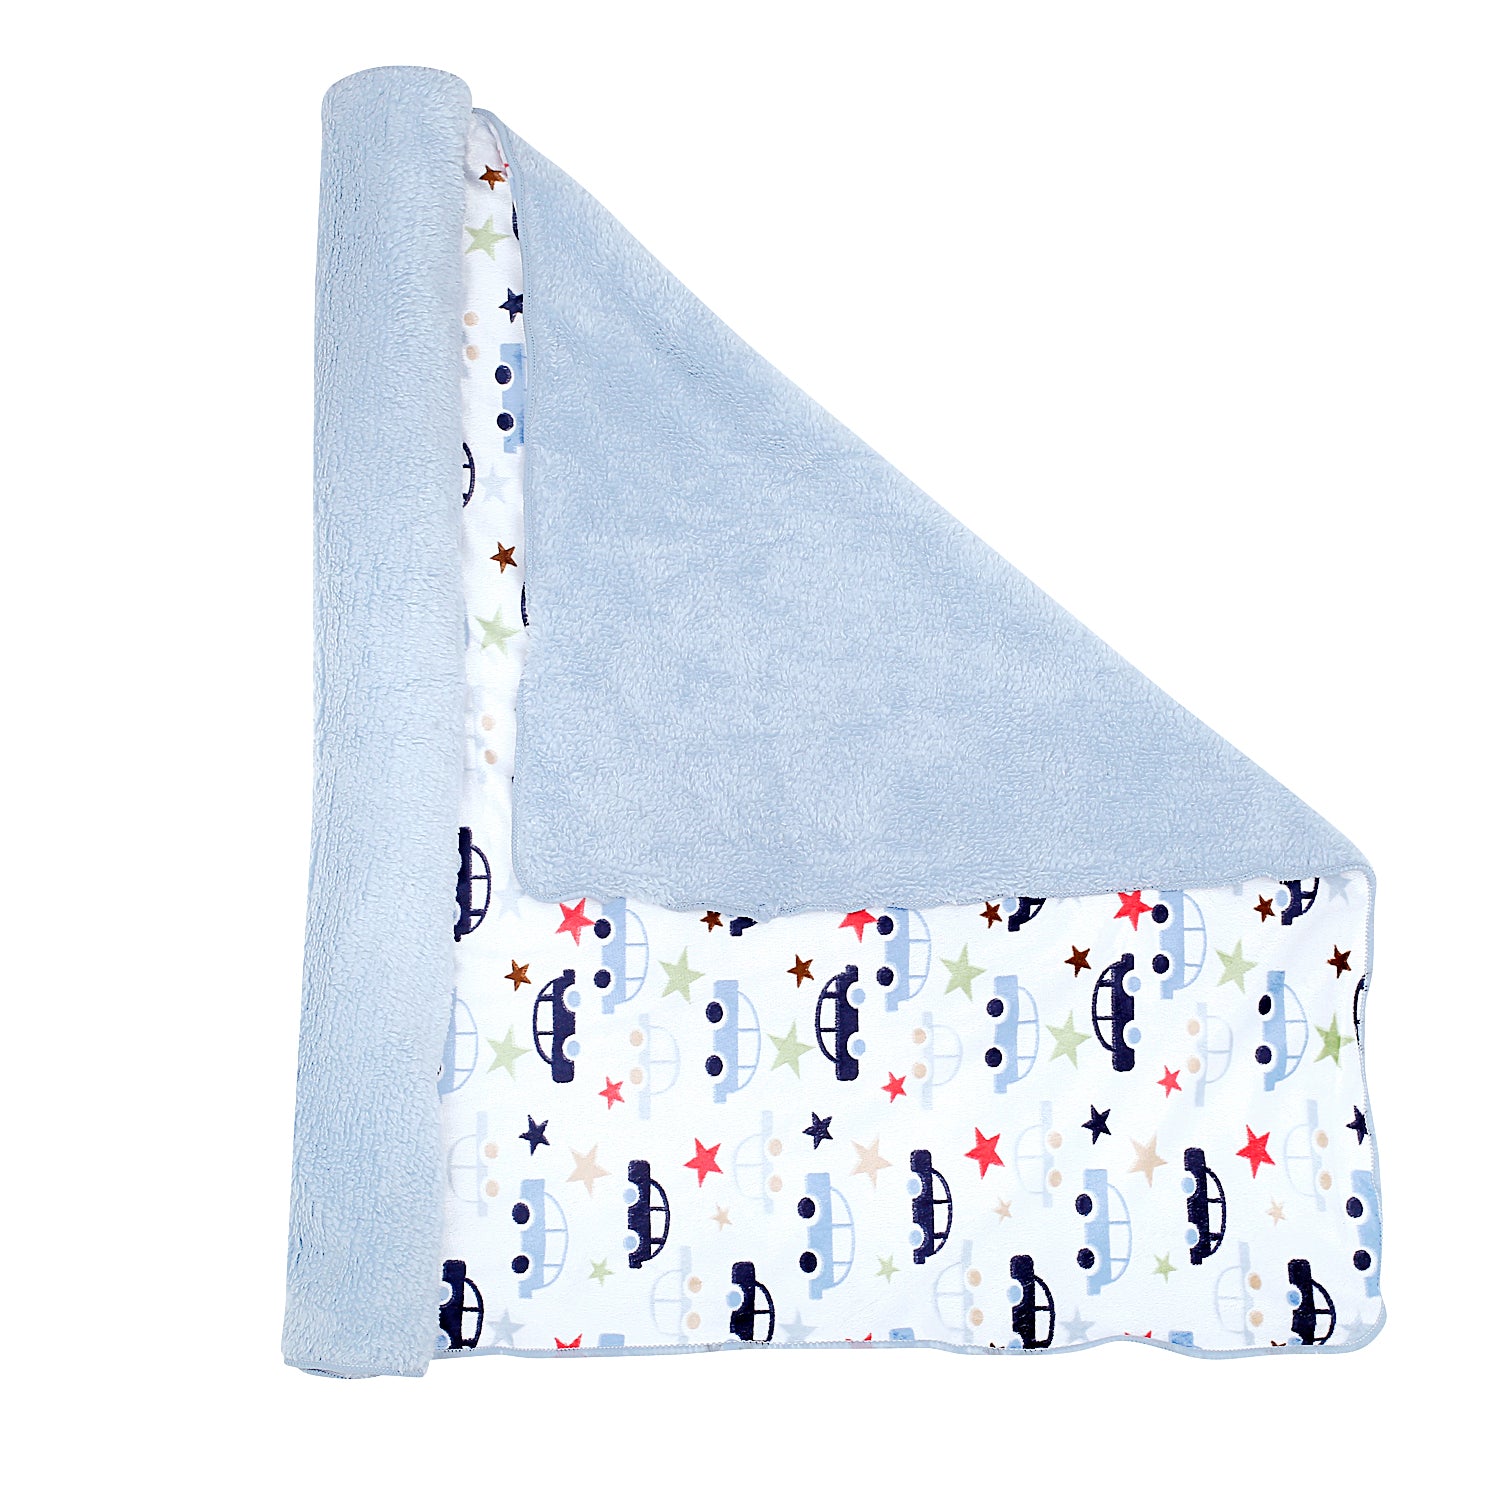 Speedy Car Blue And White Blanket - Baby Moo